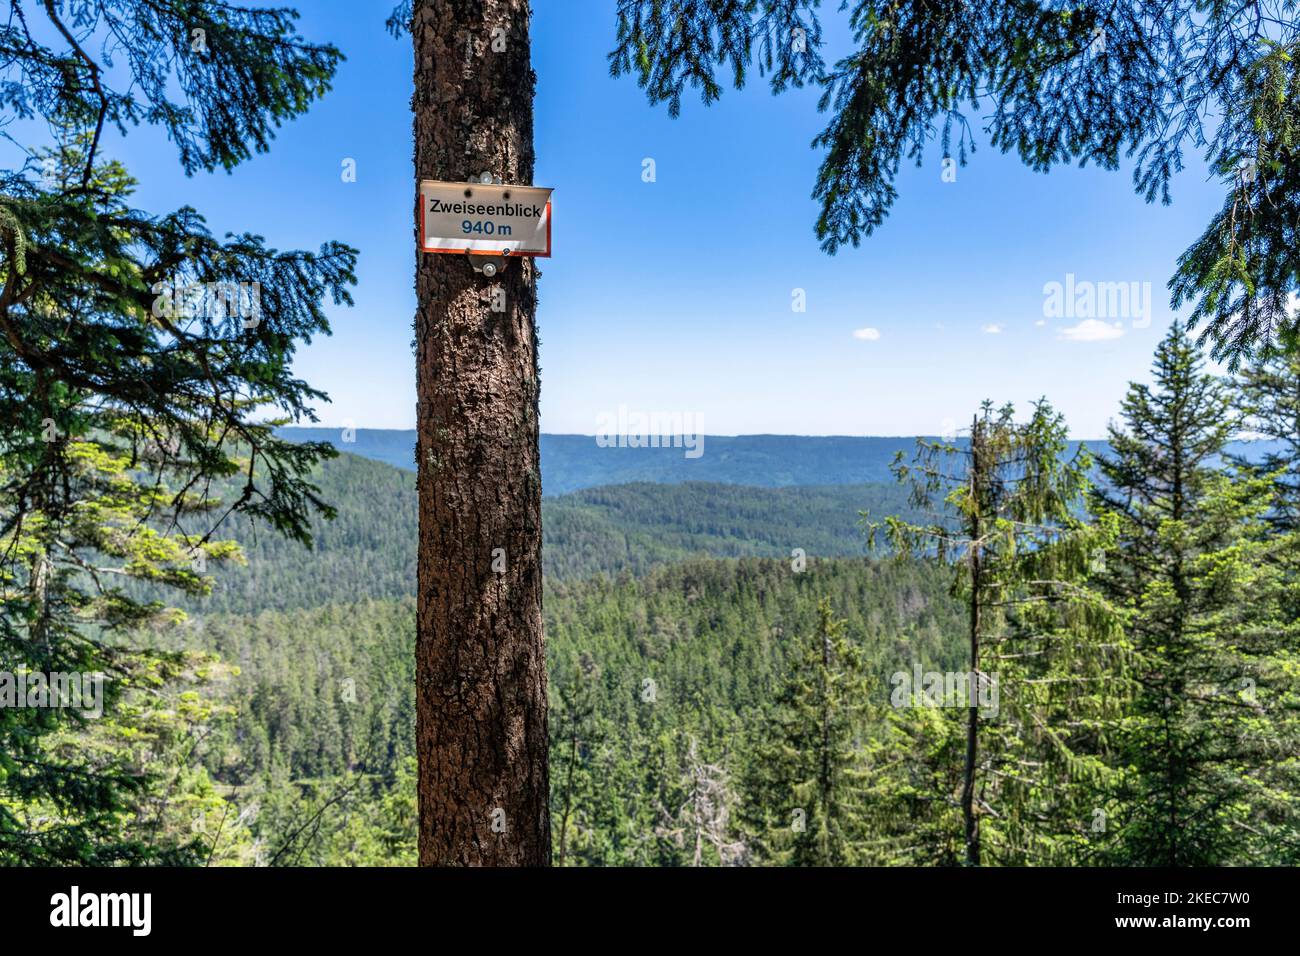 Europe, Germany, Southern Germany, Baden-Wuerttemberg, Black Forest, View from the viewpoint Zweiseenblick over the northern Black Forest Stock Photo